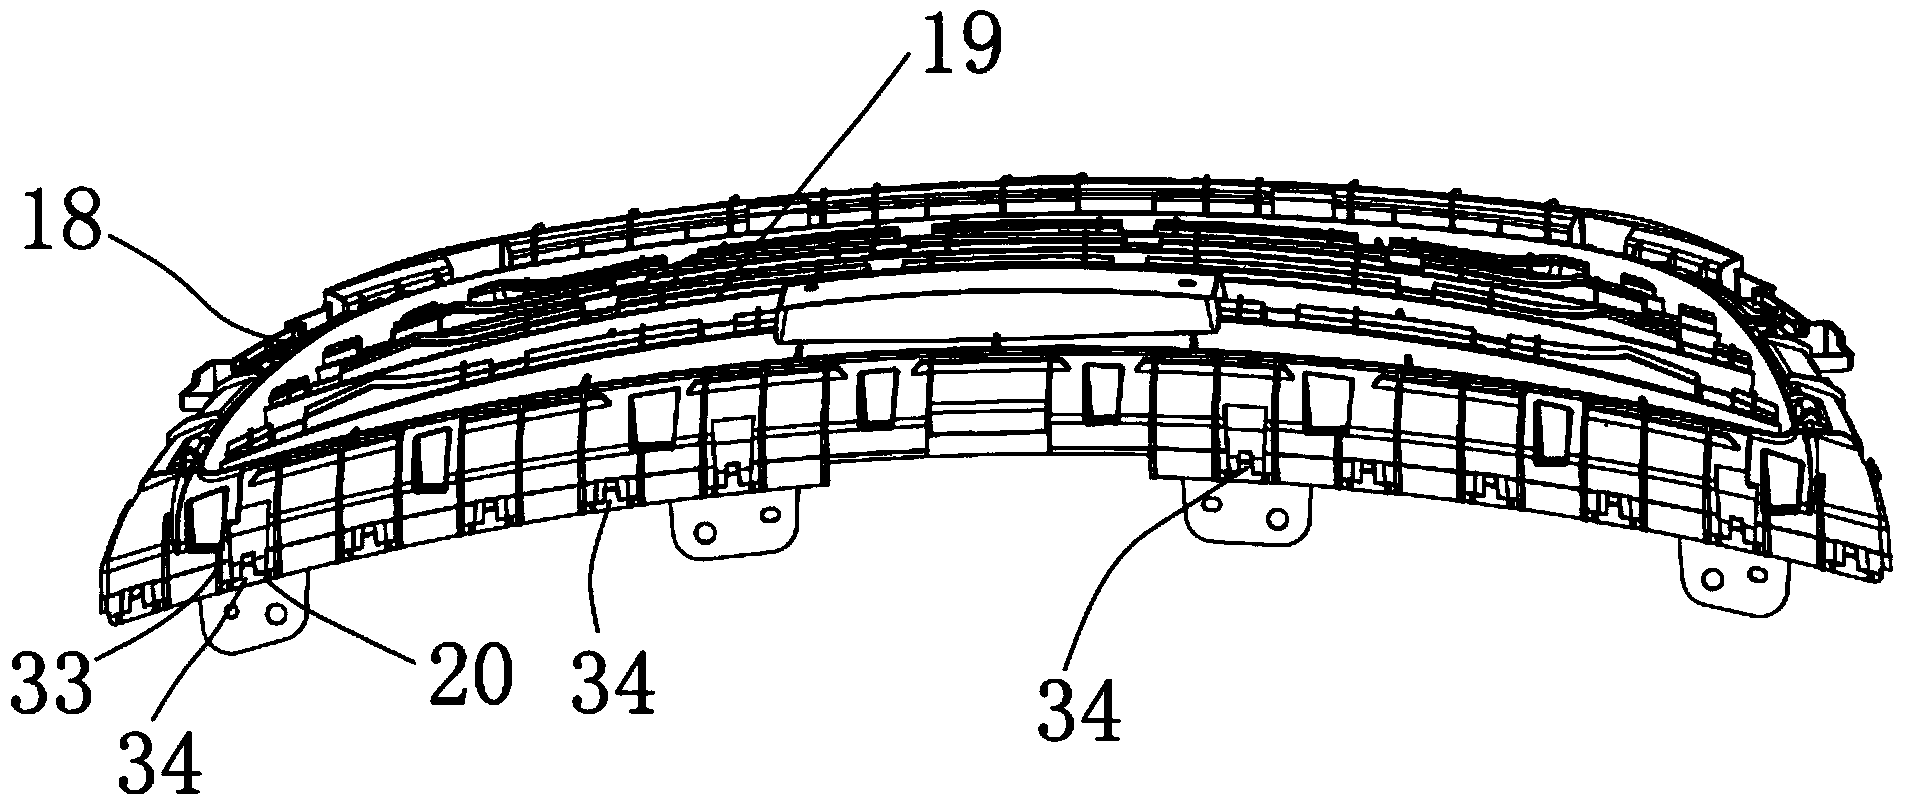 Automotive radiator grille body structure